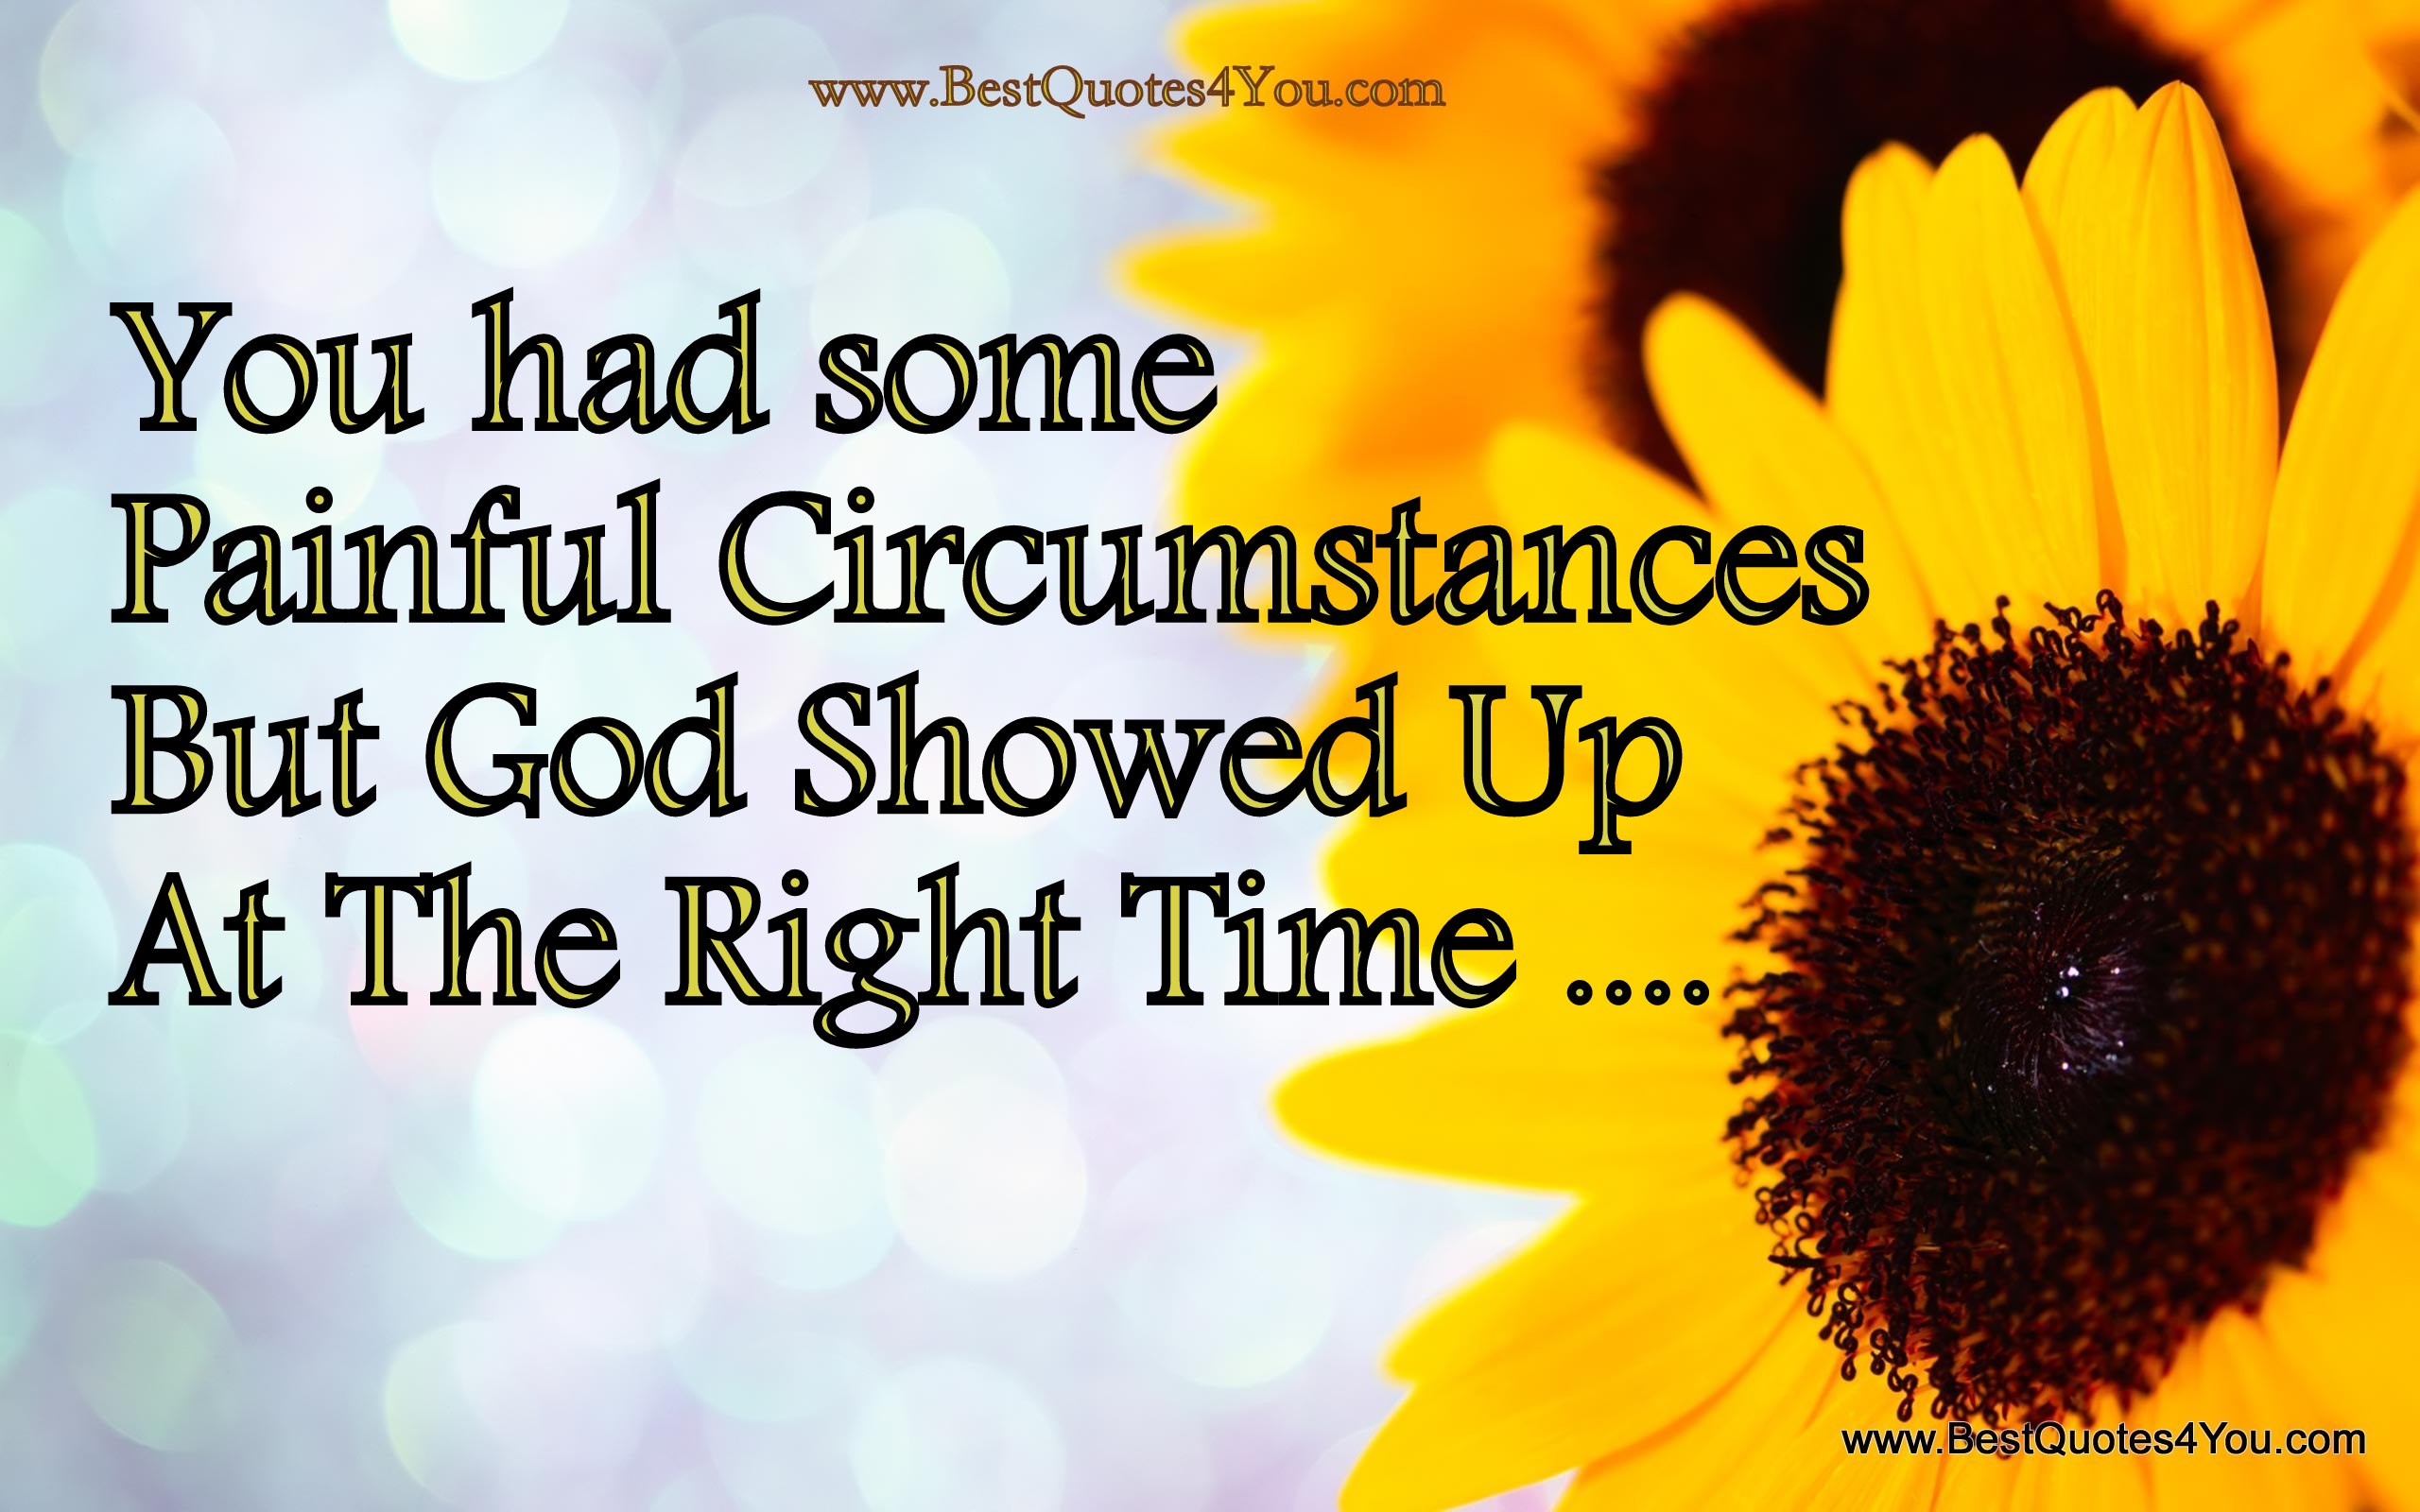 You had some painful circumstances. But god showed up at the right time.